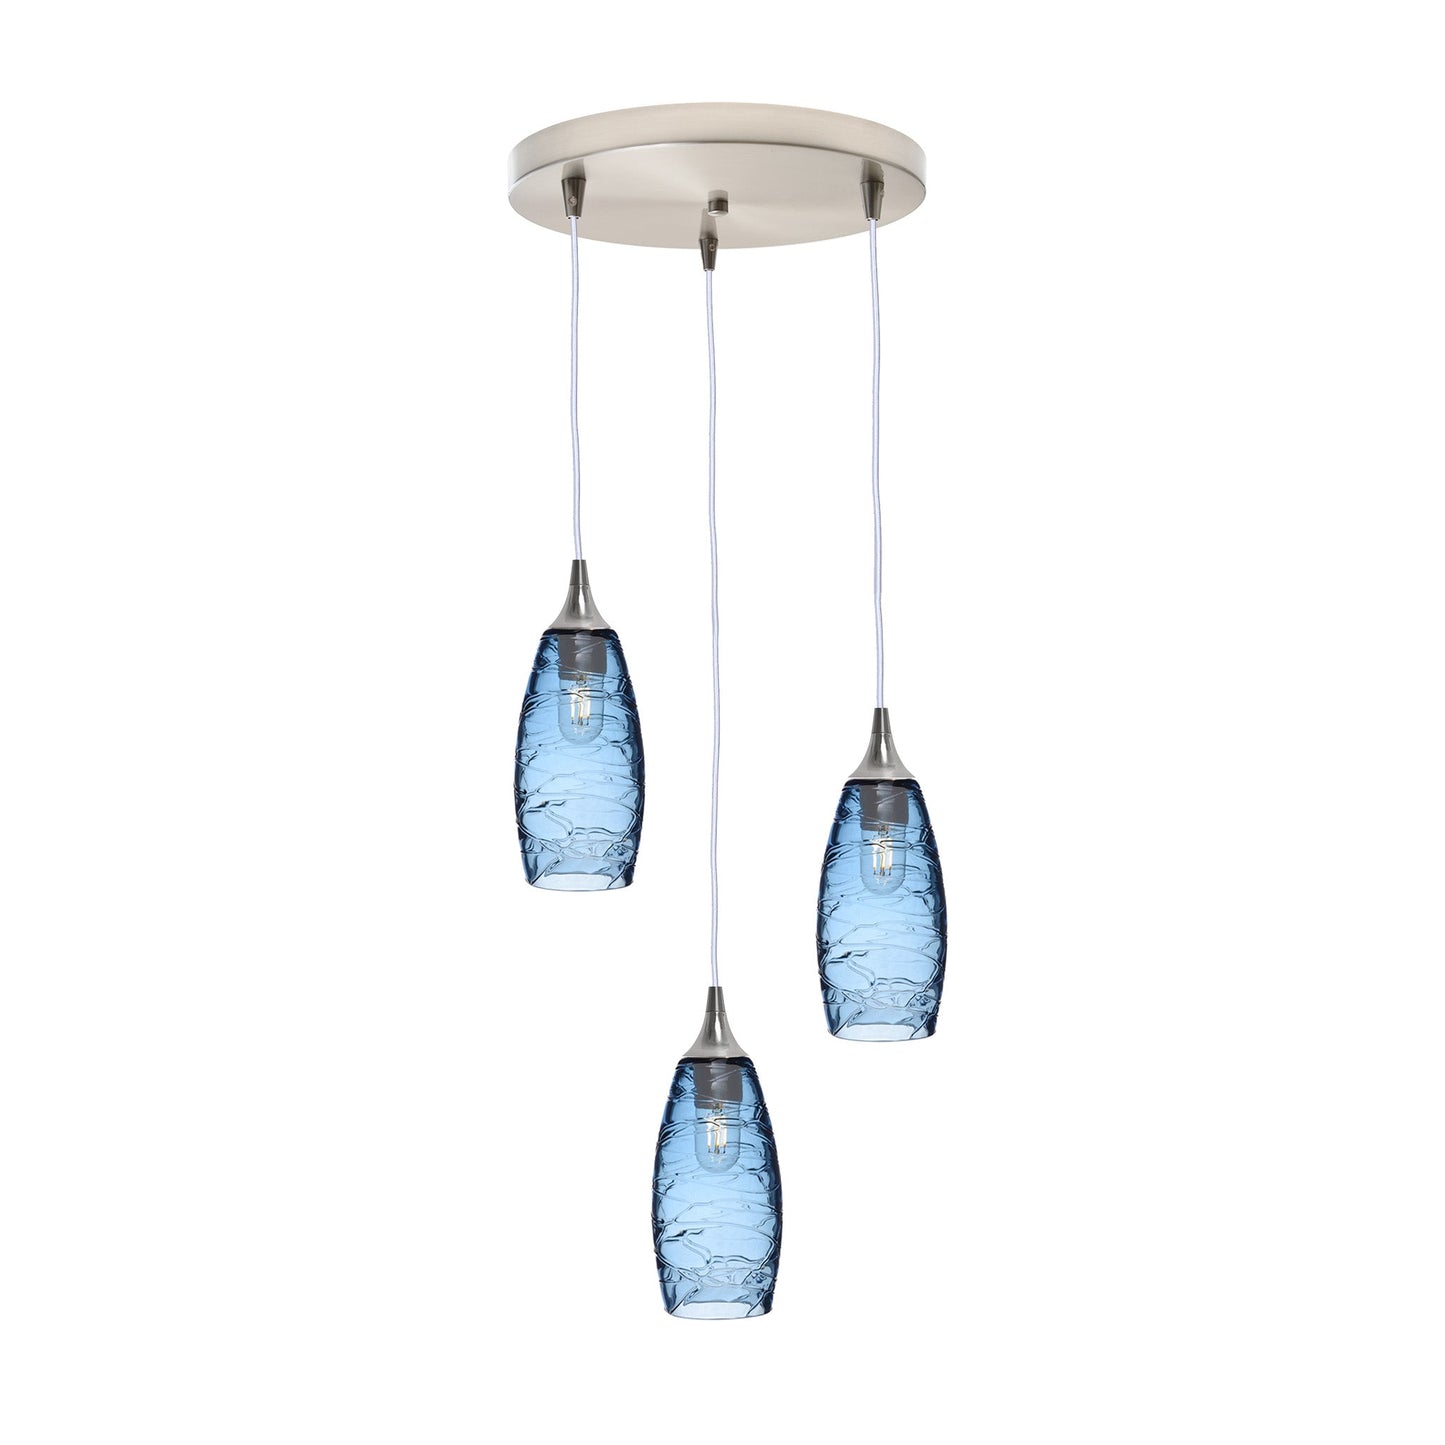 147 Spun: 3 Pendant Cascade Chandelier-Glass-Bicycle Glass Co - Hotshop-Steel Blue-Brushed Nickel-Bicycle Glass Co